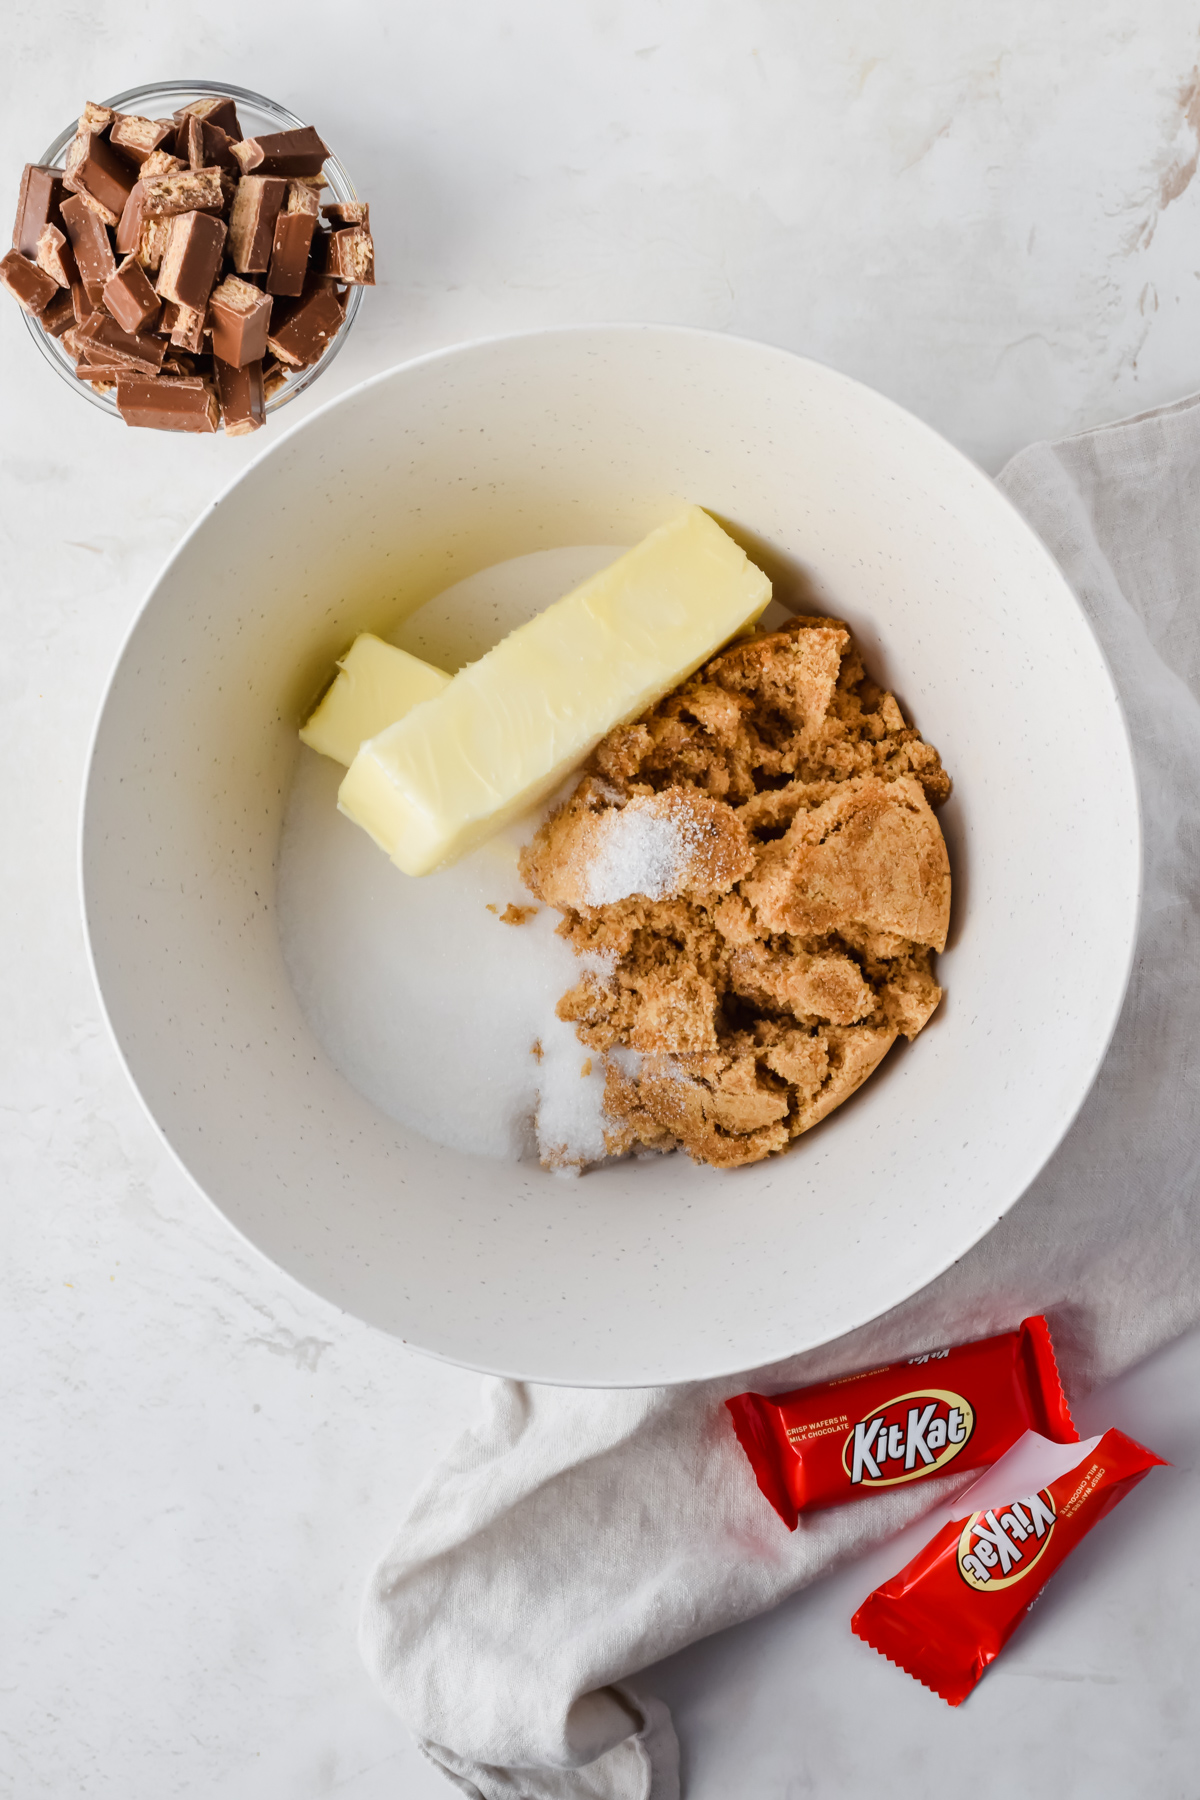 butter and sugar in white mixing bowl before mixing with small bowl of chopped kit kats beside bowl.